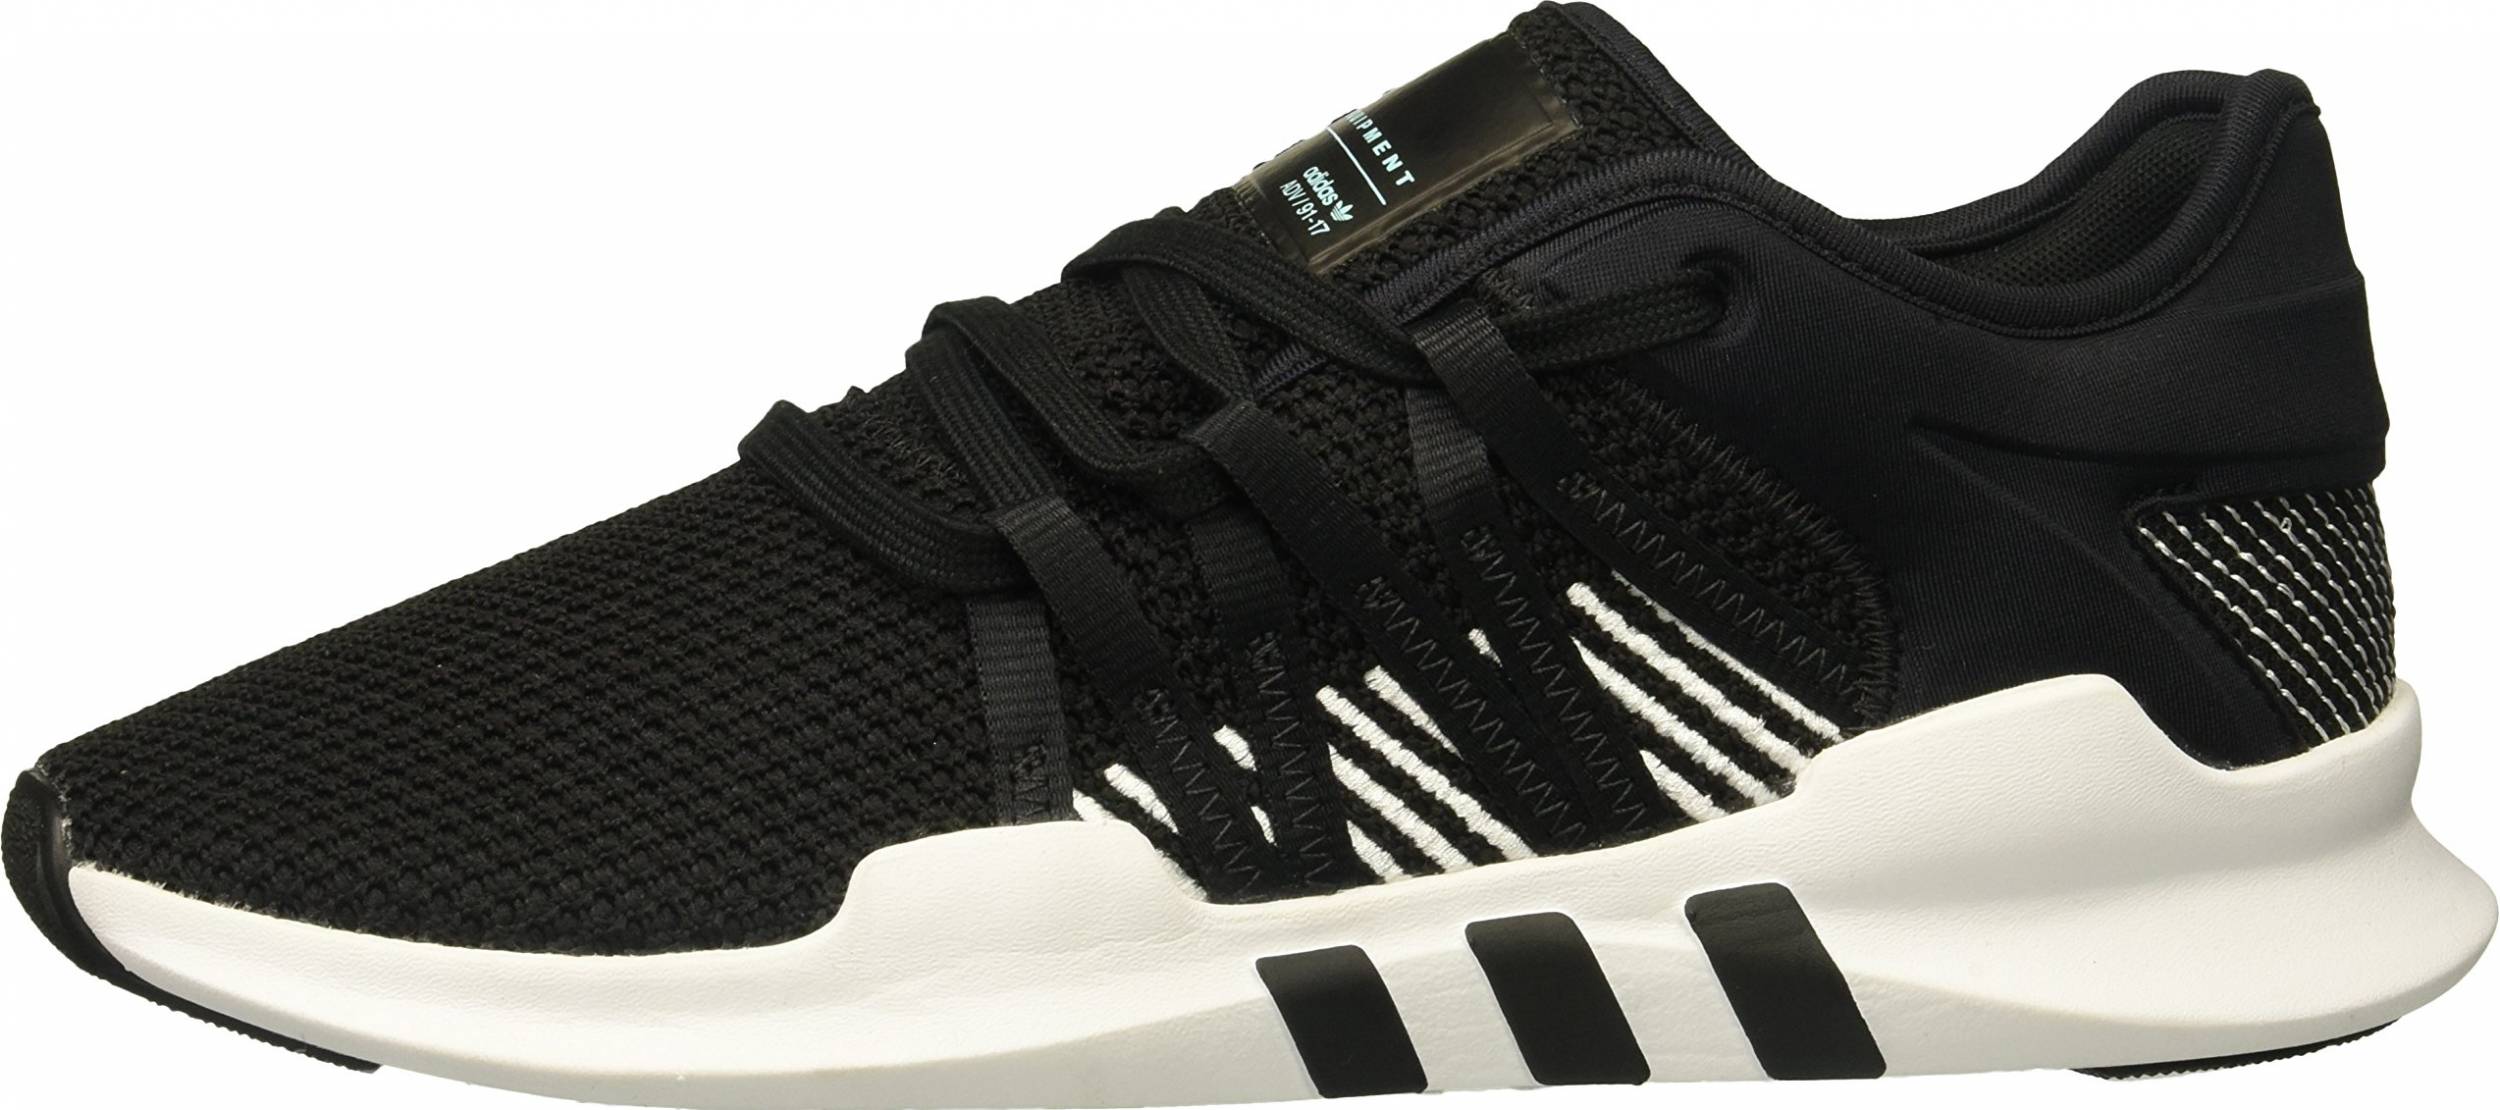 Adidas EQT Racing ADV sneakers in 10 colors (only $70) RunRepeat